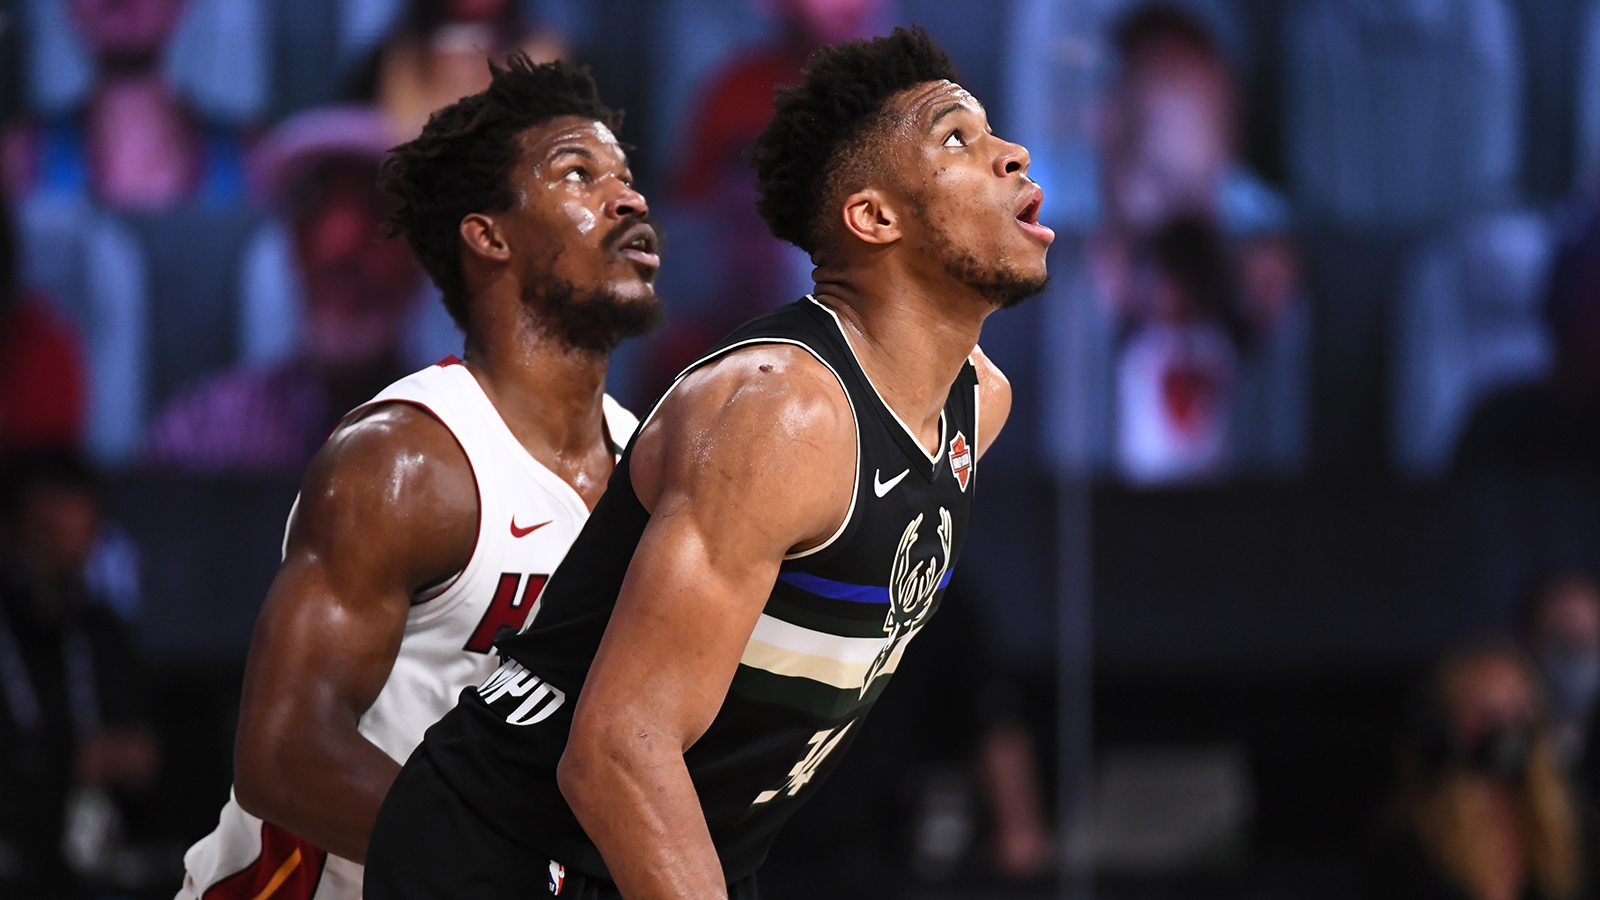 What’s Next For Giannis & The Bucks?